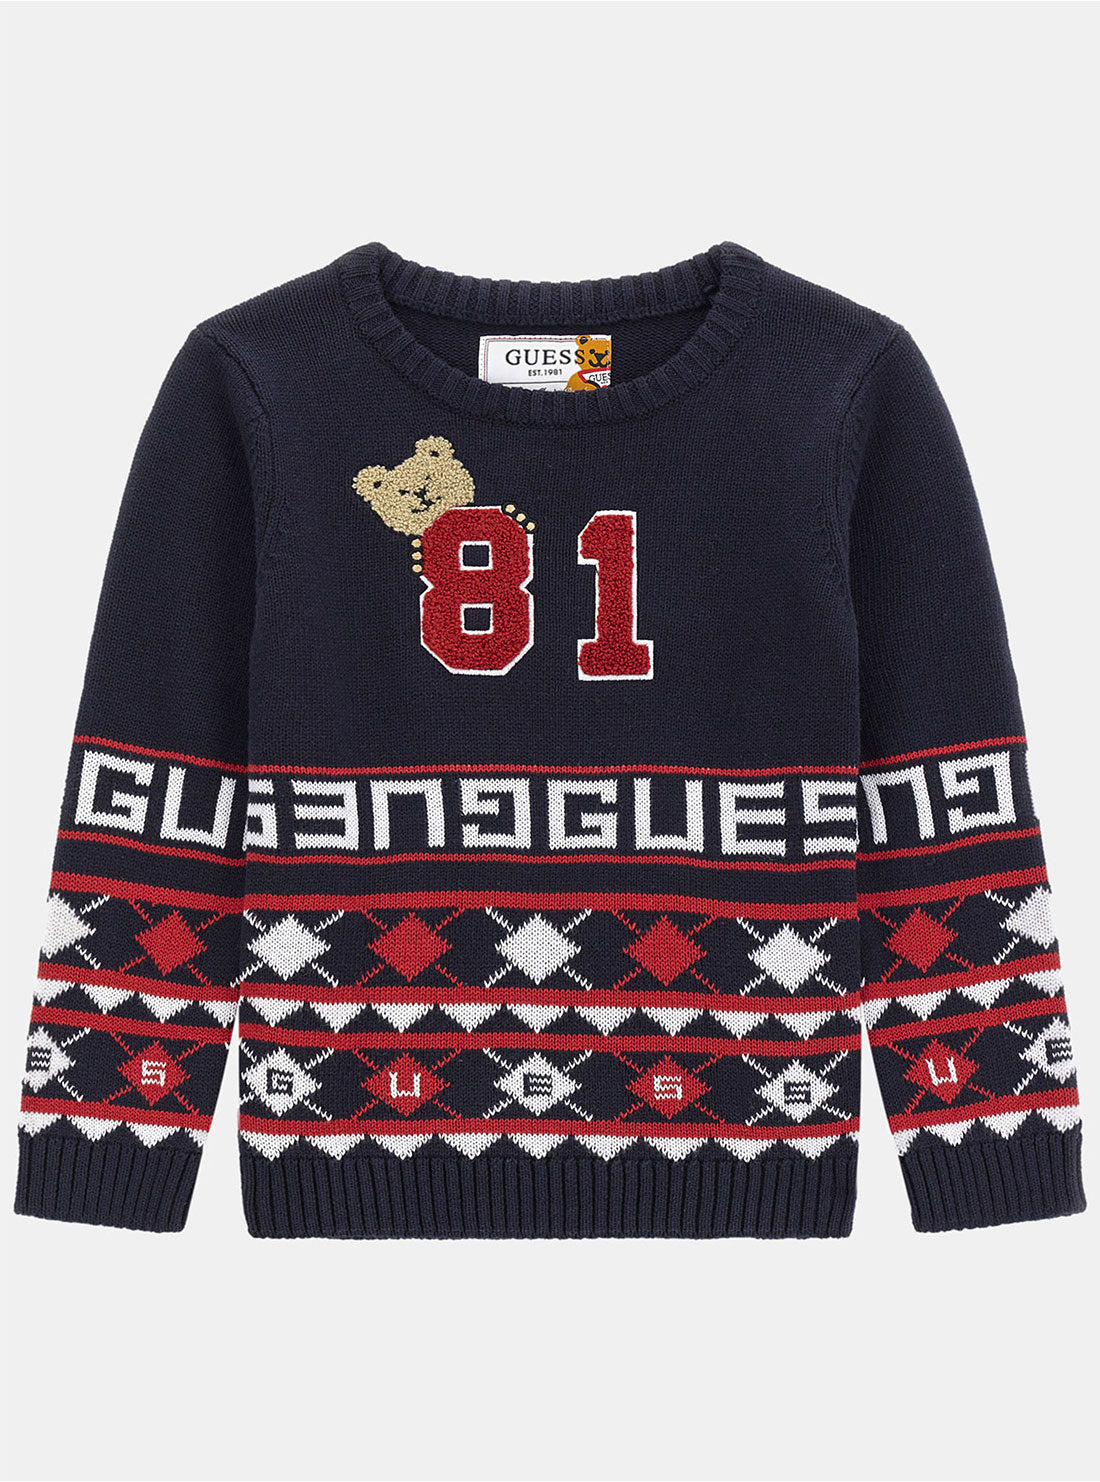 GUESS Navy Long Sleeve Sweater (2-7) front view